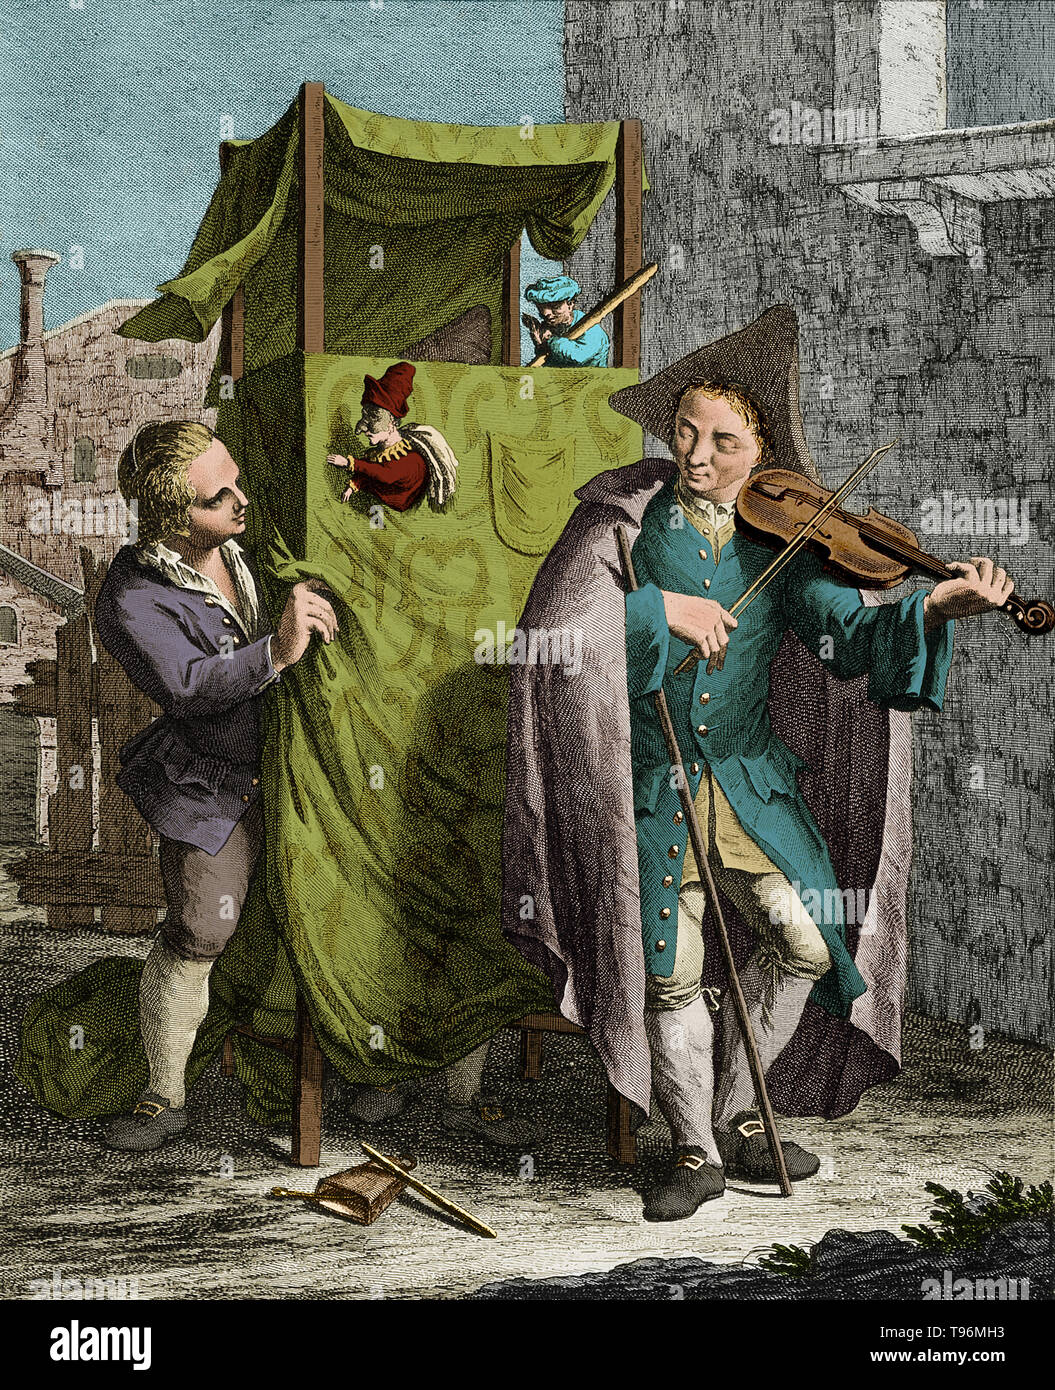 A young man plays a violin in front of a Punch and Judy stand while a puppeteer, who usually hides underneath the stand, manipulates the puppet. The hat and feet of  second puppeteer can be seen hiding behind the curtain. Engraving by Giovanni Volpato after Francesco Maggiotto, c. late 18th century. Stock Photo